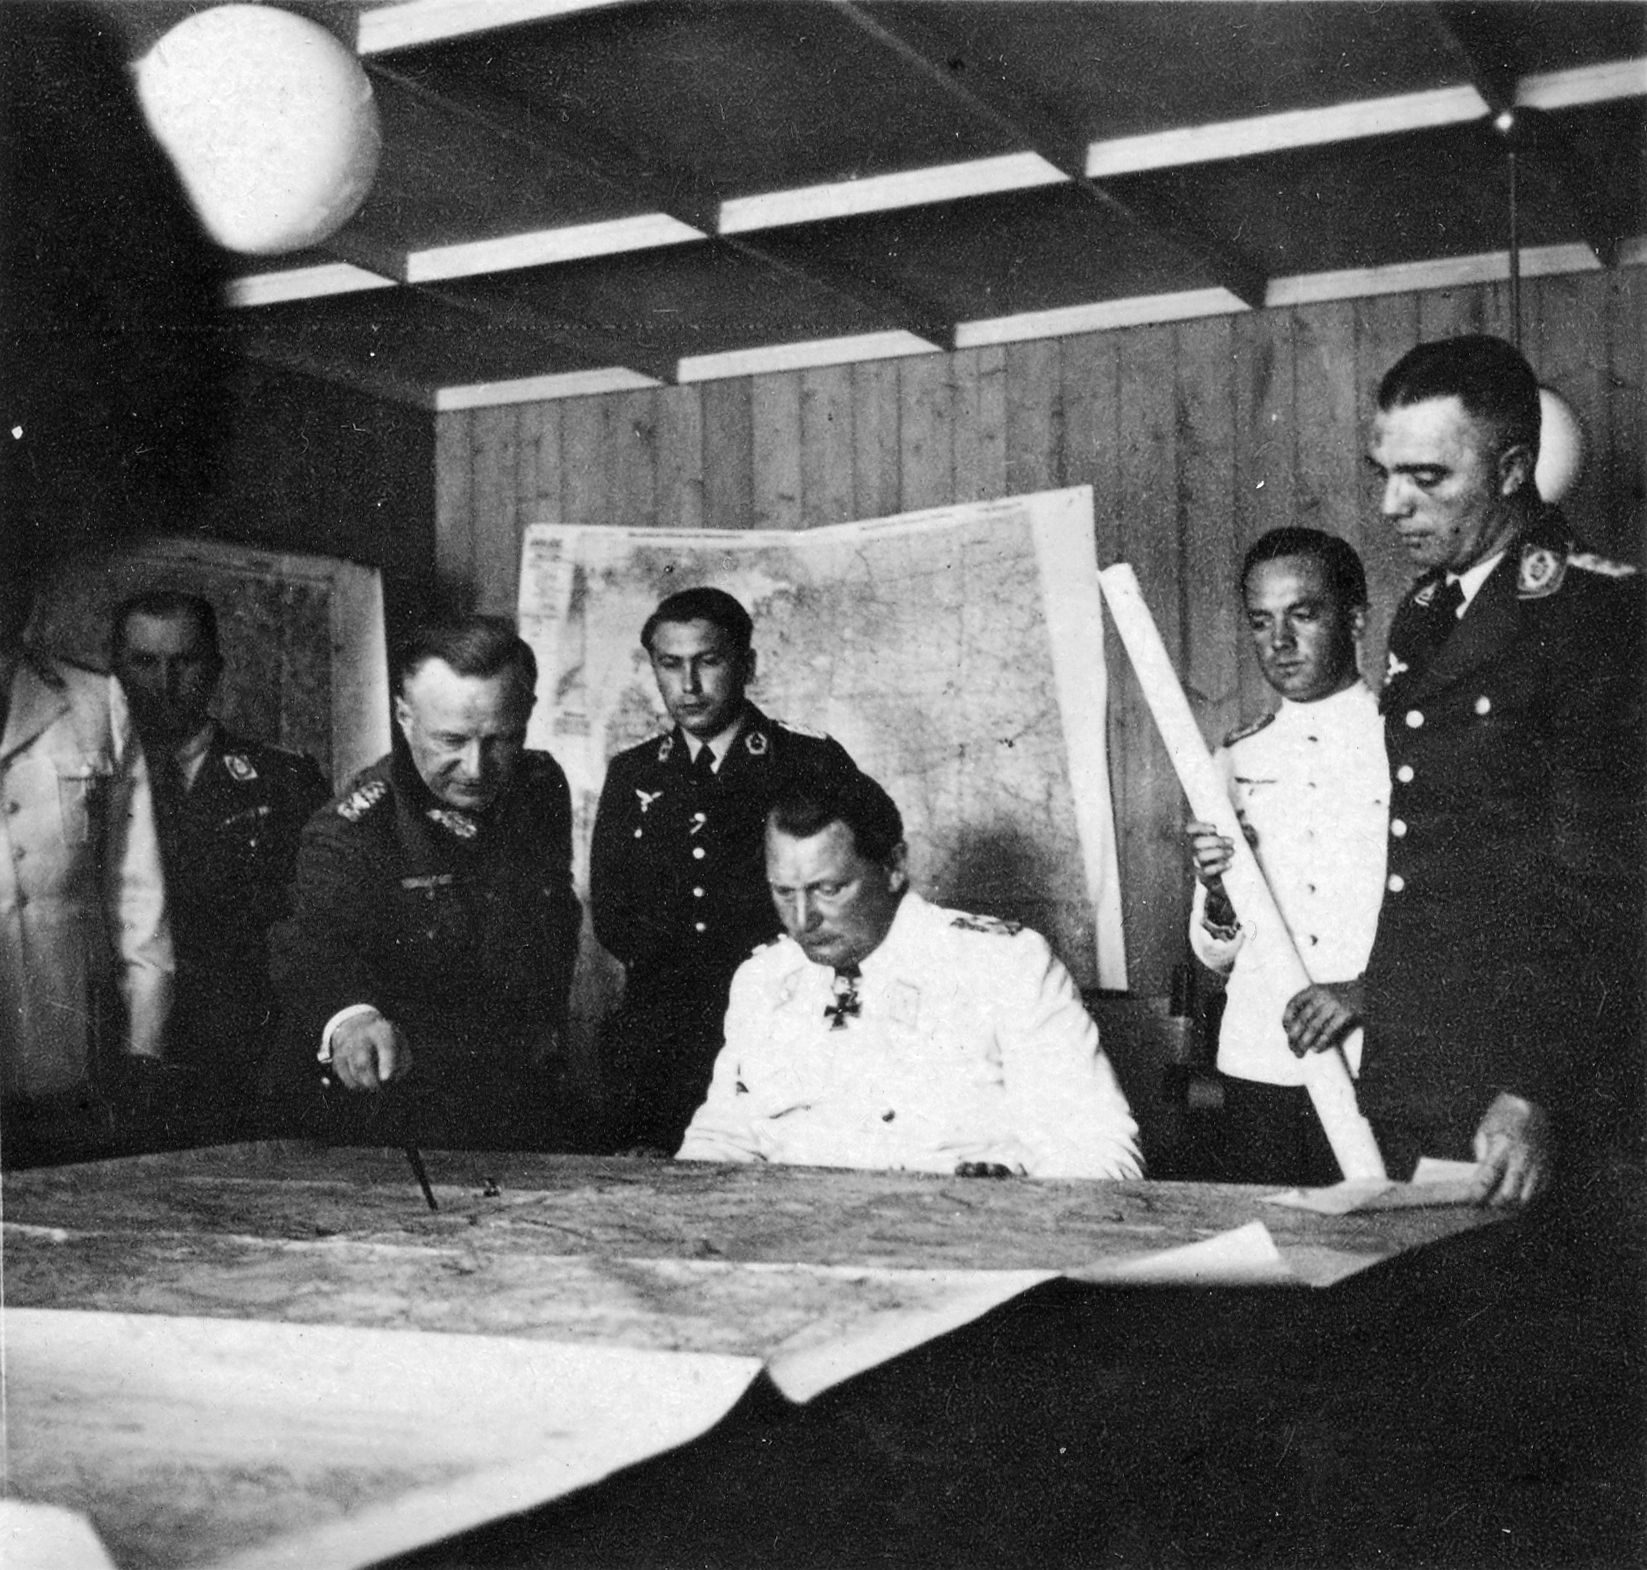 The Reichsmarschall studies the map table during a briefing by generals at his headquarters.